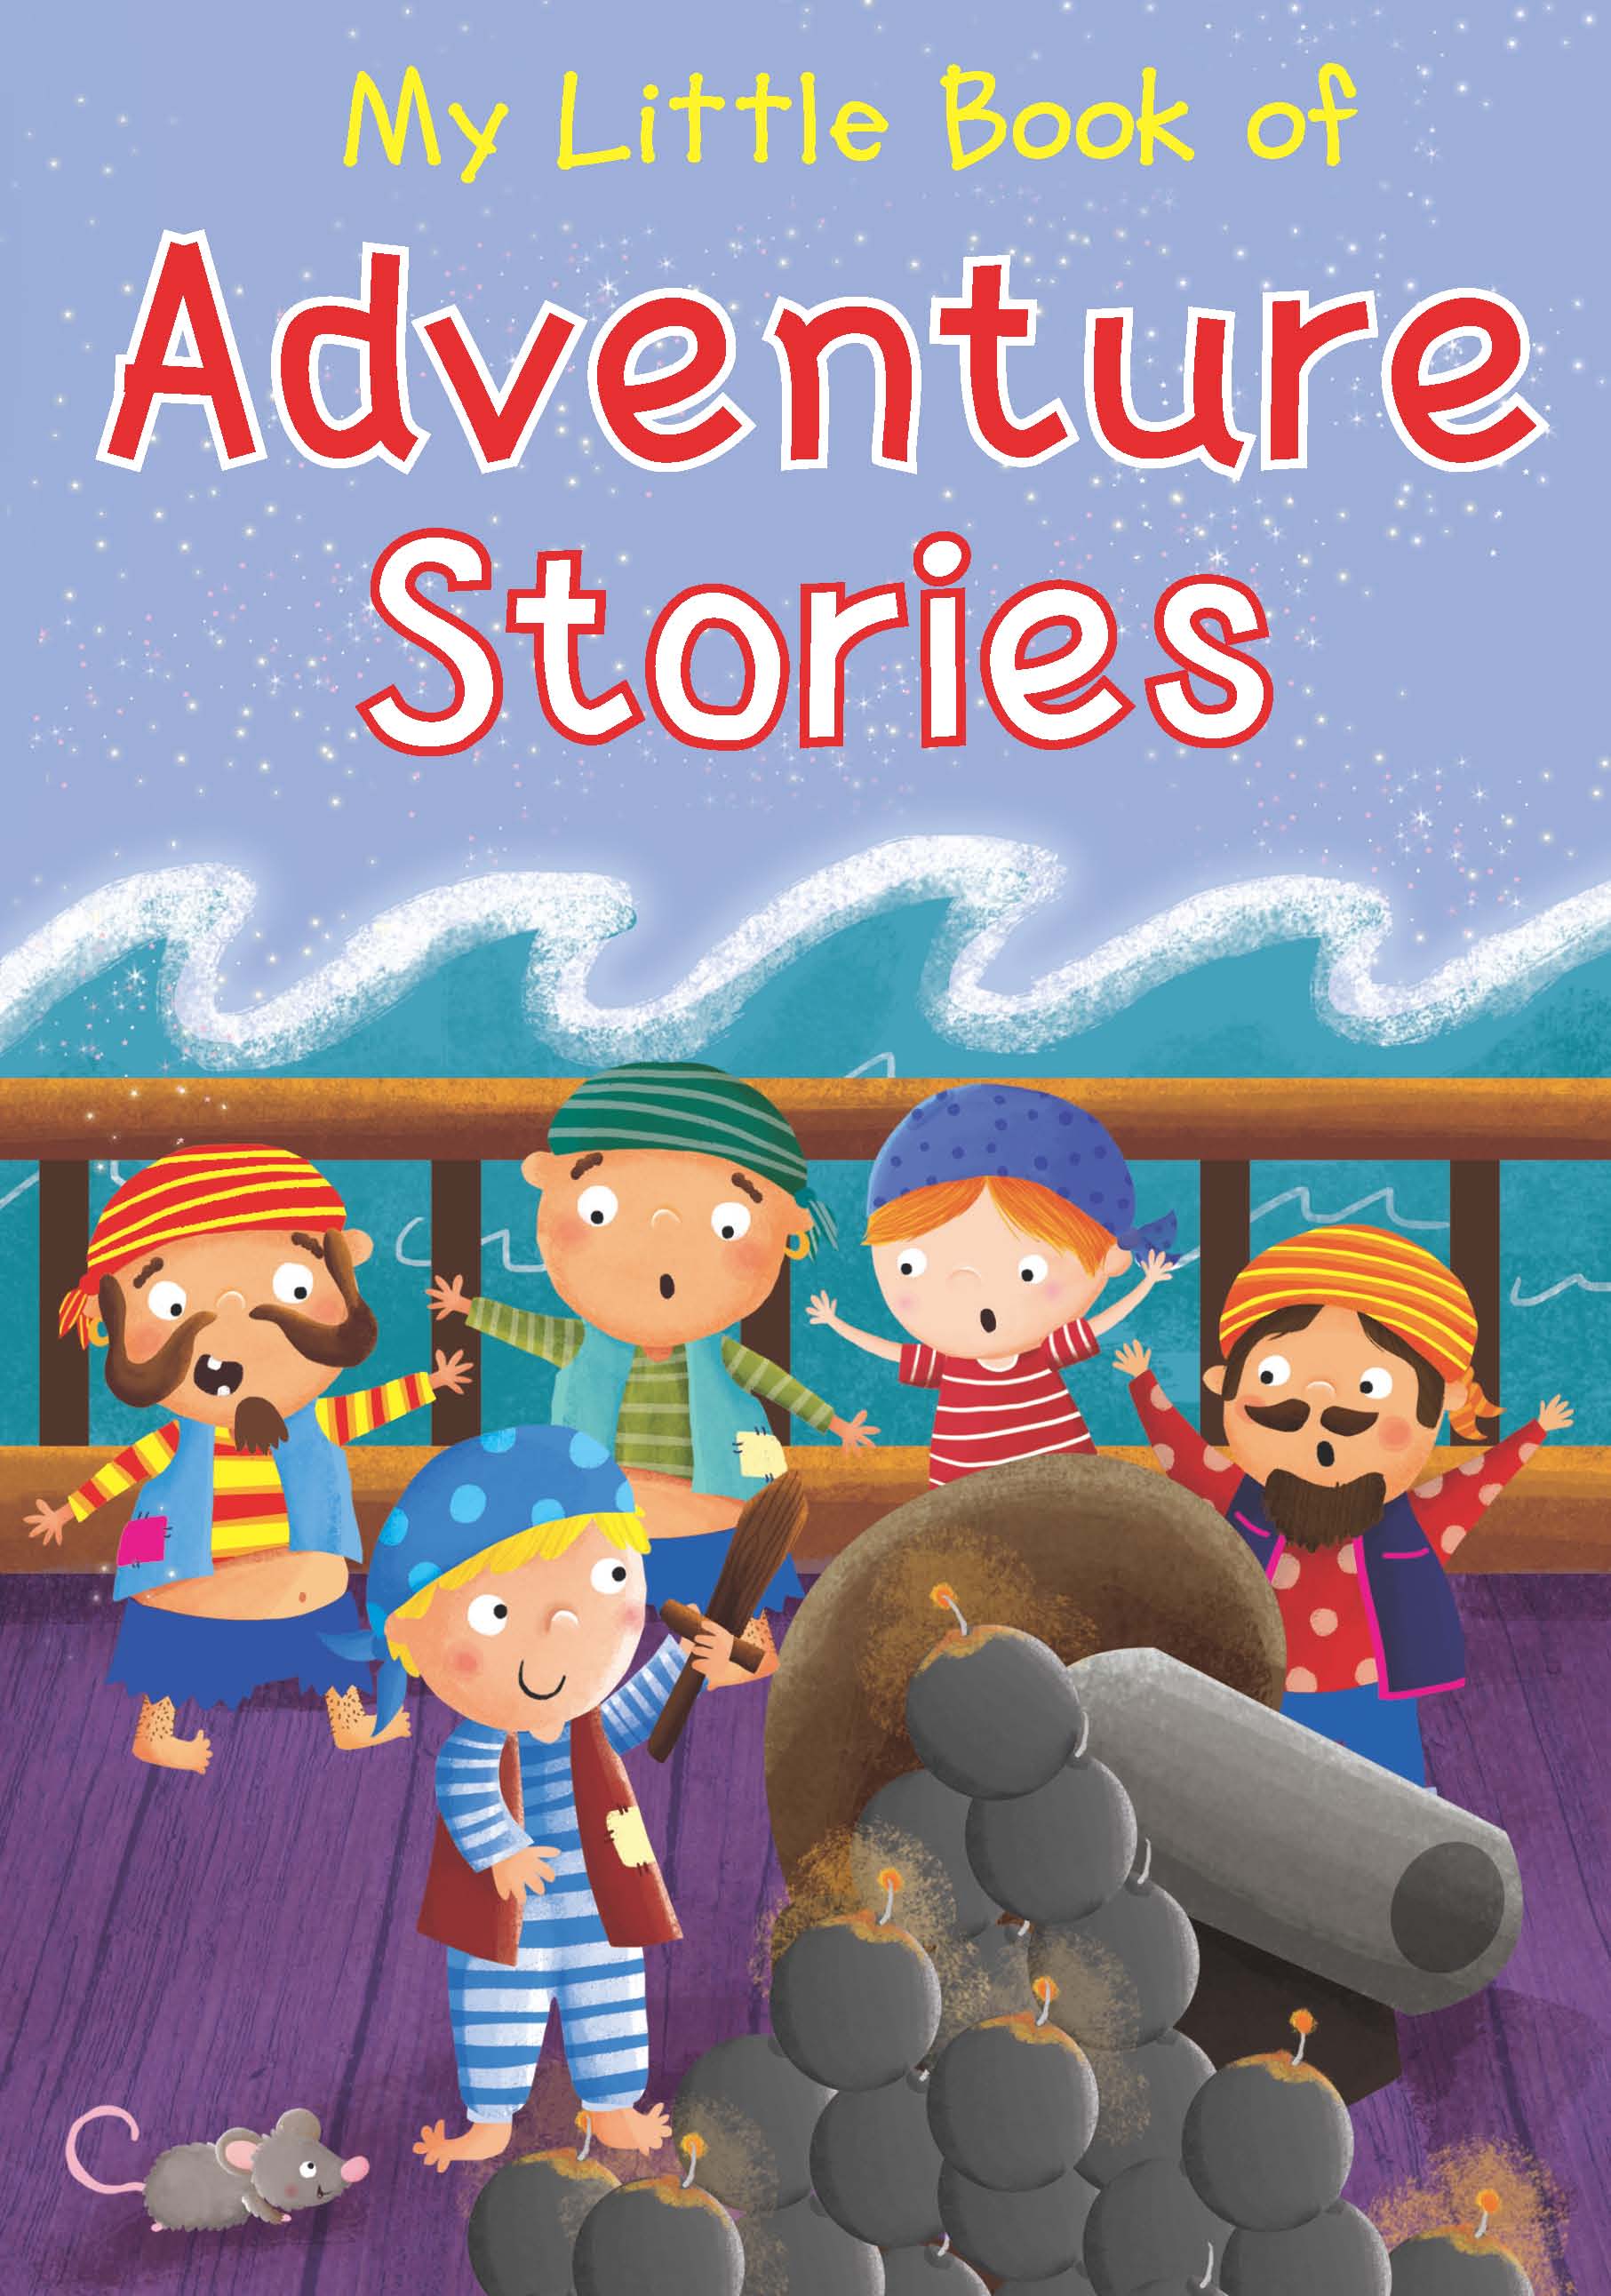 MY LITTLE BOOK OF ADVENTURE STORIES -BROWN AND WATSON - Jashanmal Home